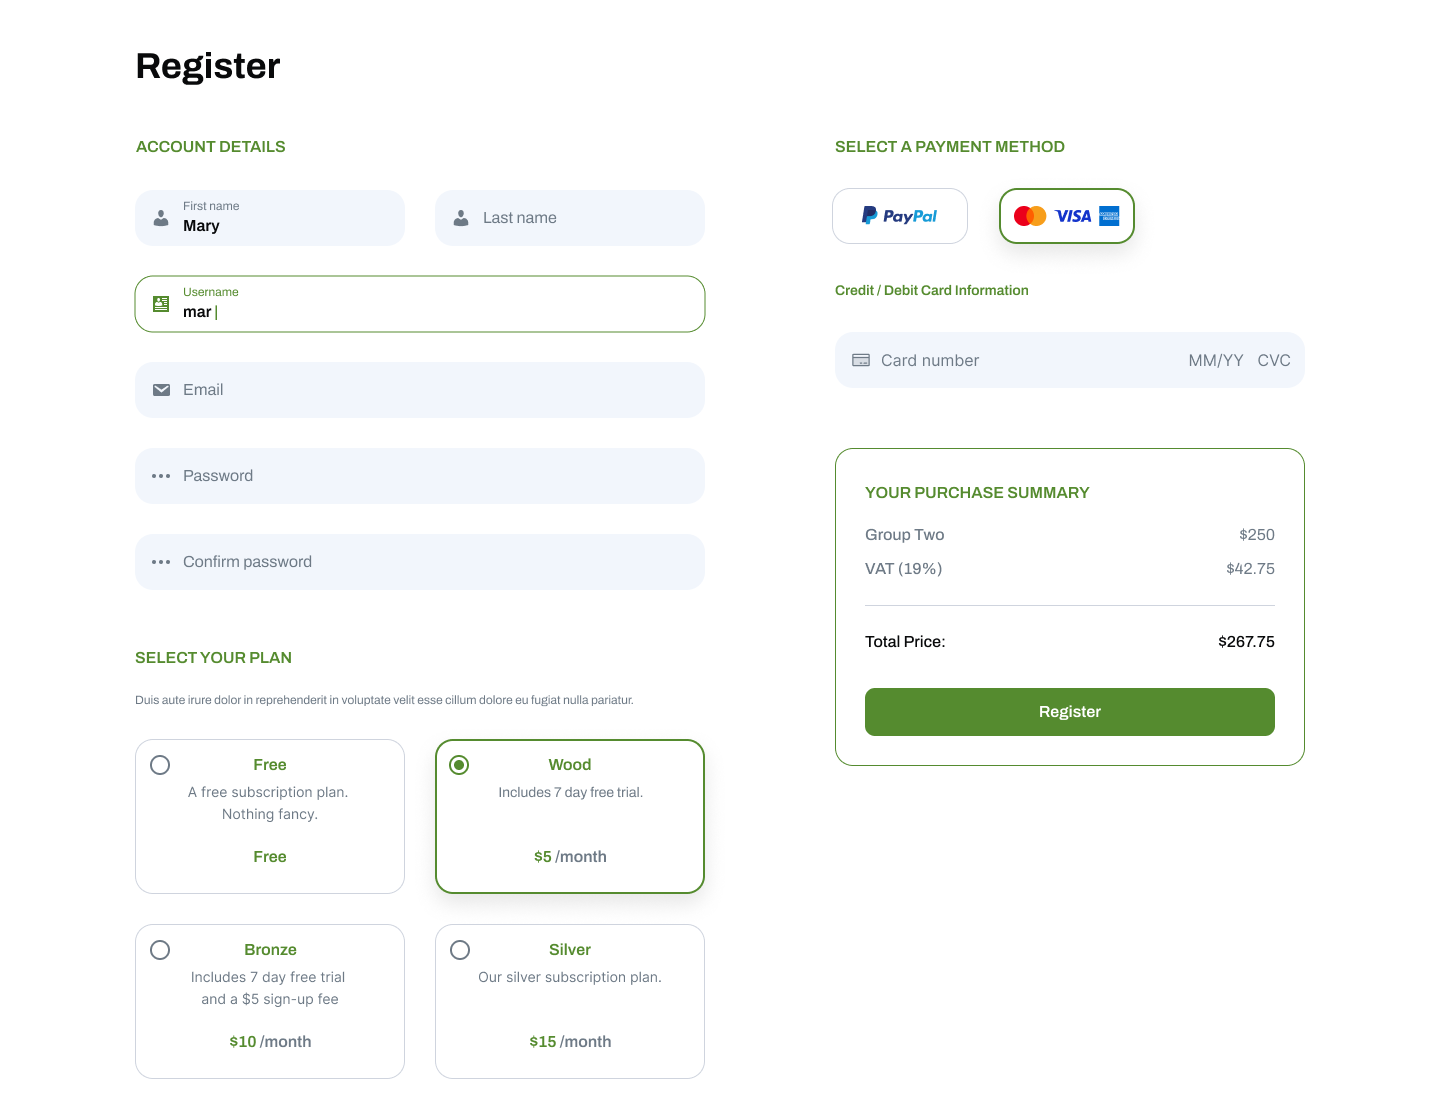 Registration form with subscription plans and payment